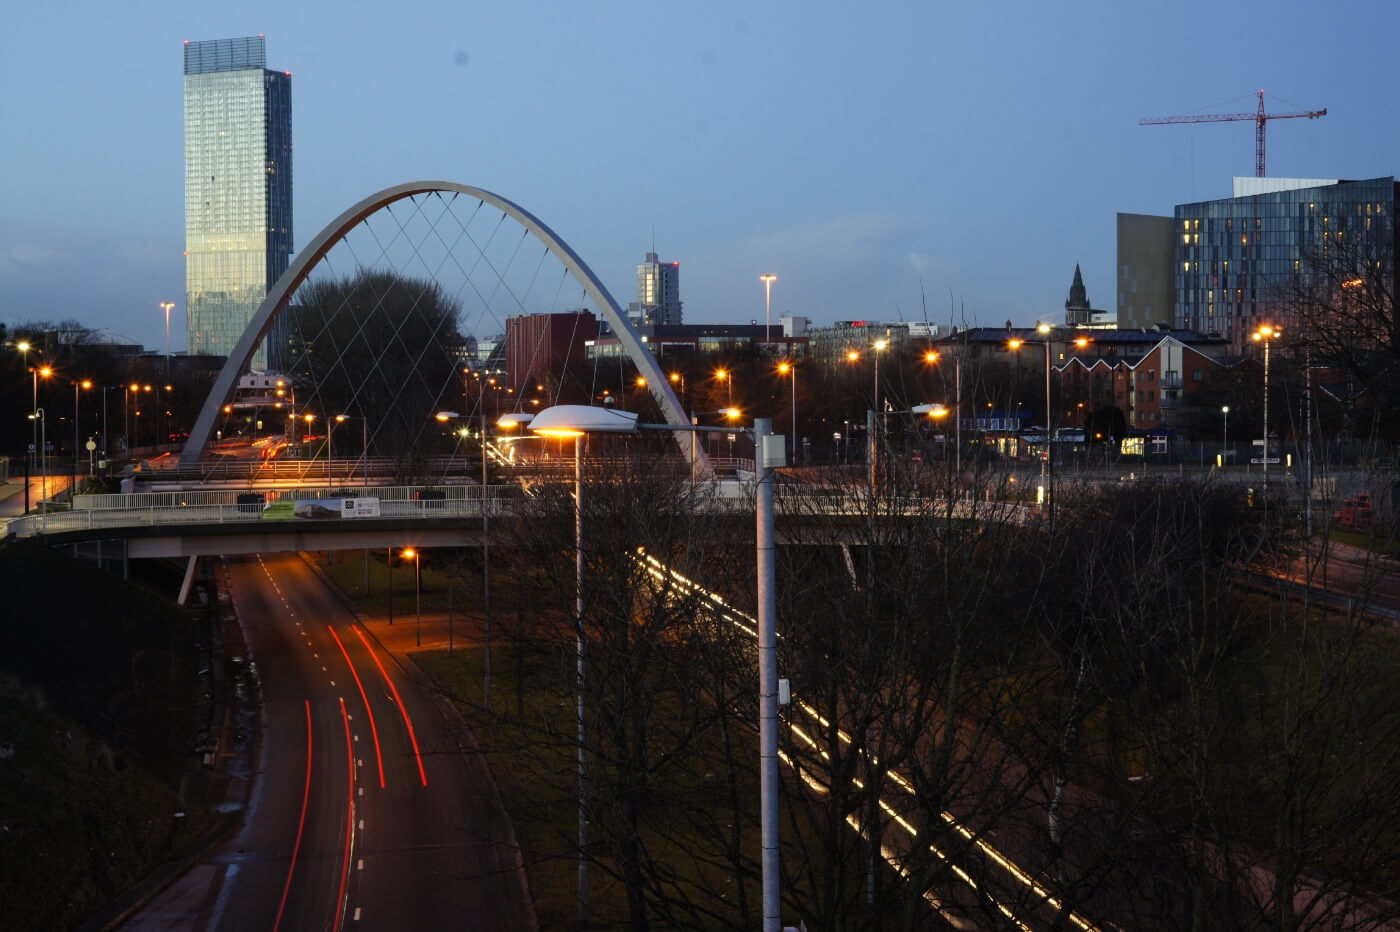 Student Accommodation in Hulme, Manchester - view of Hulme Arch in the evening